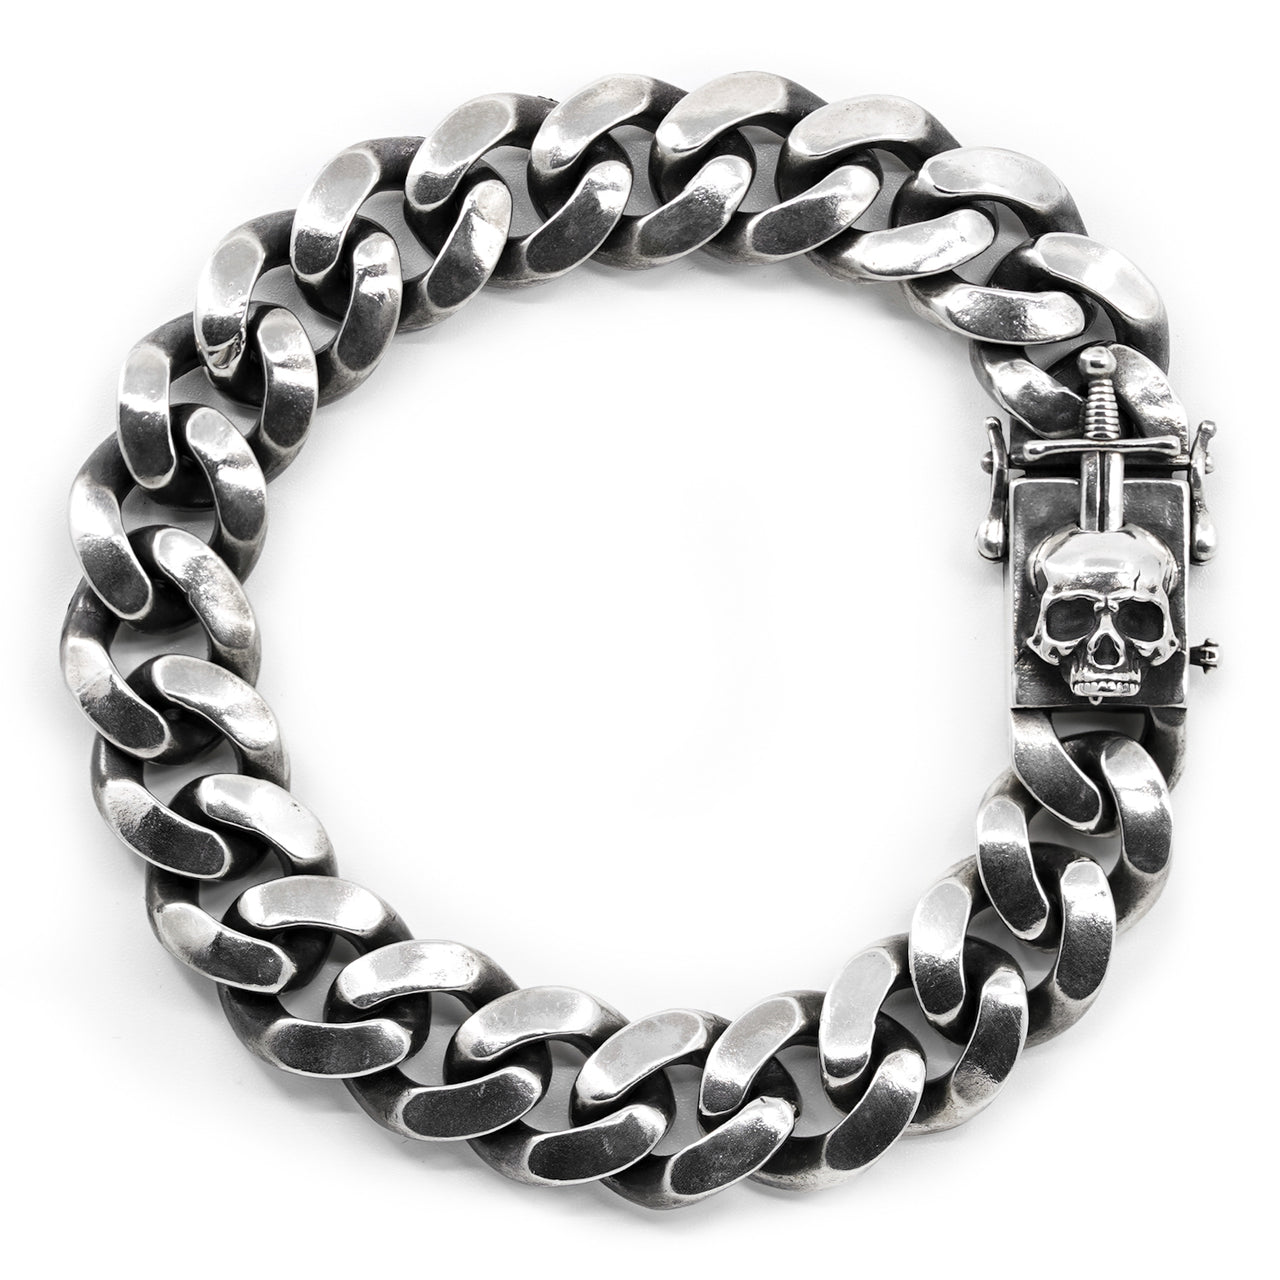 Conquered Bracelet - Sterling Silver Sword and Skull Clasp - Black Feather Design